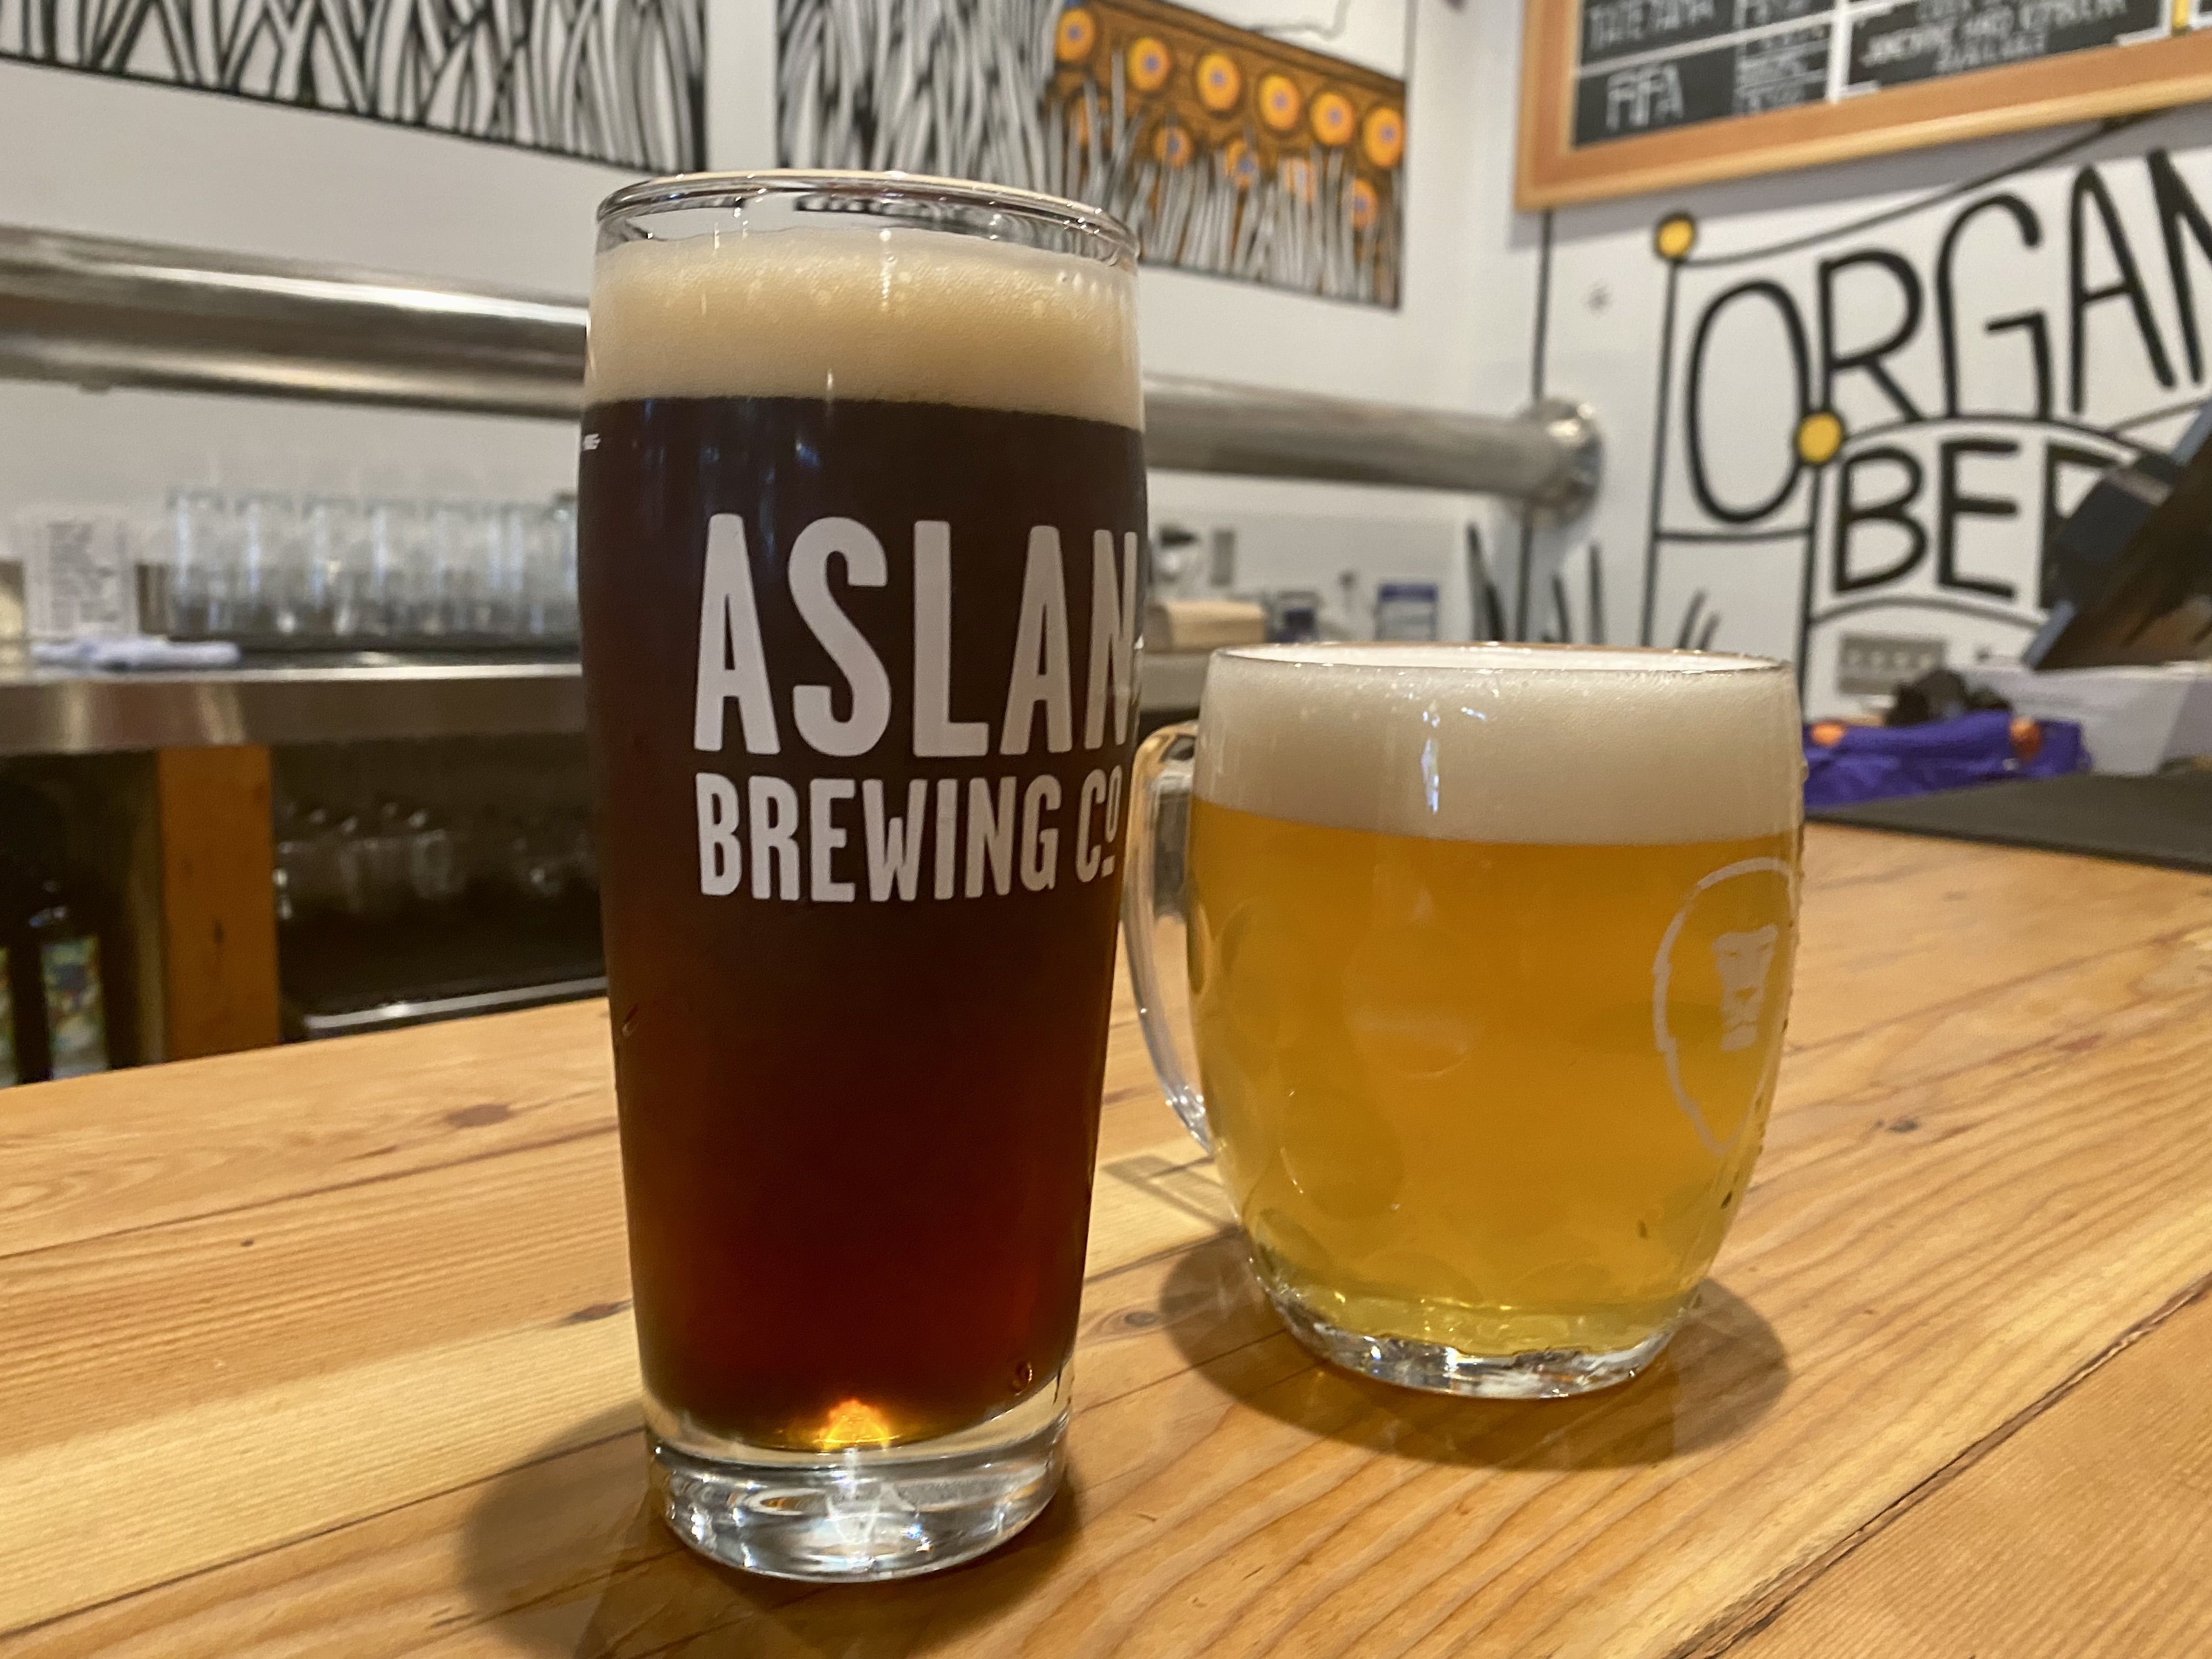 A brown ale in a tall glass and a ligher colored beer in a shorter glass on a wooden bar.